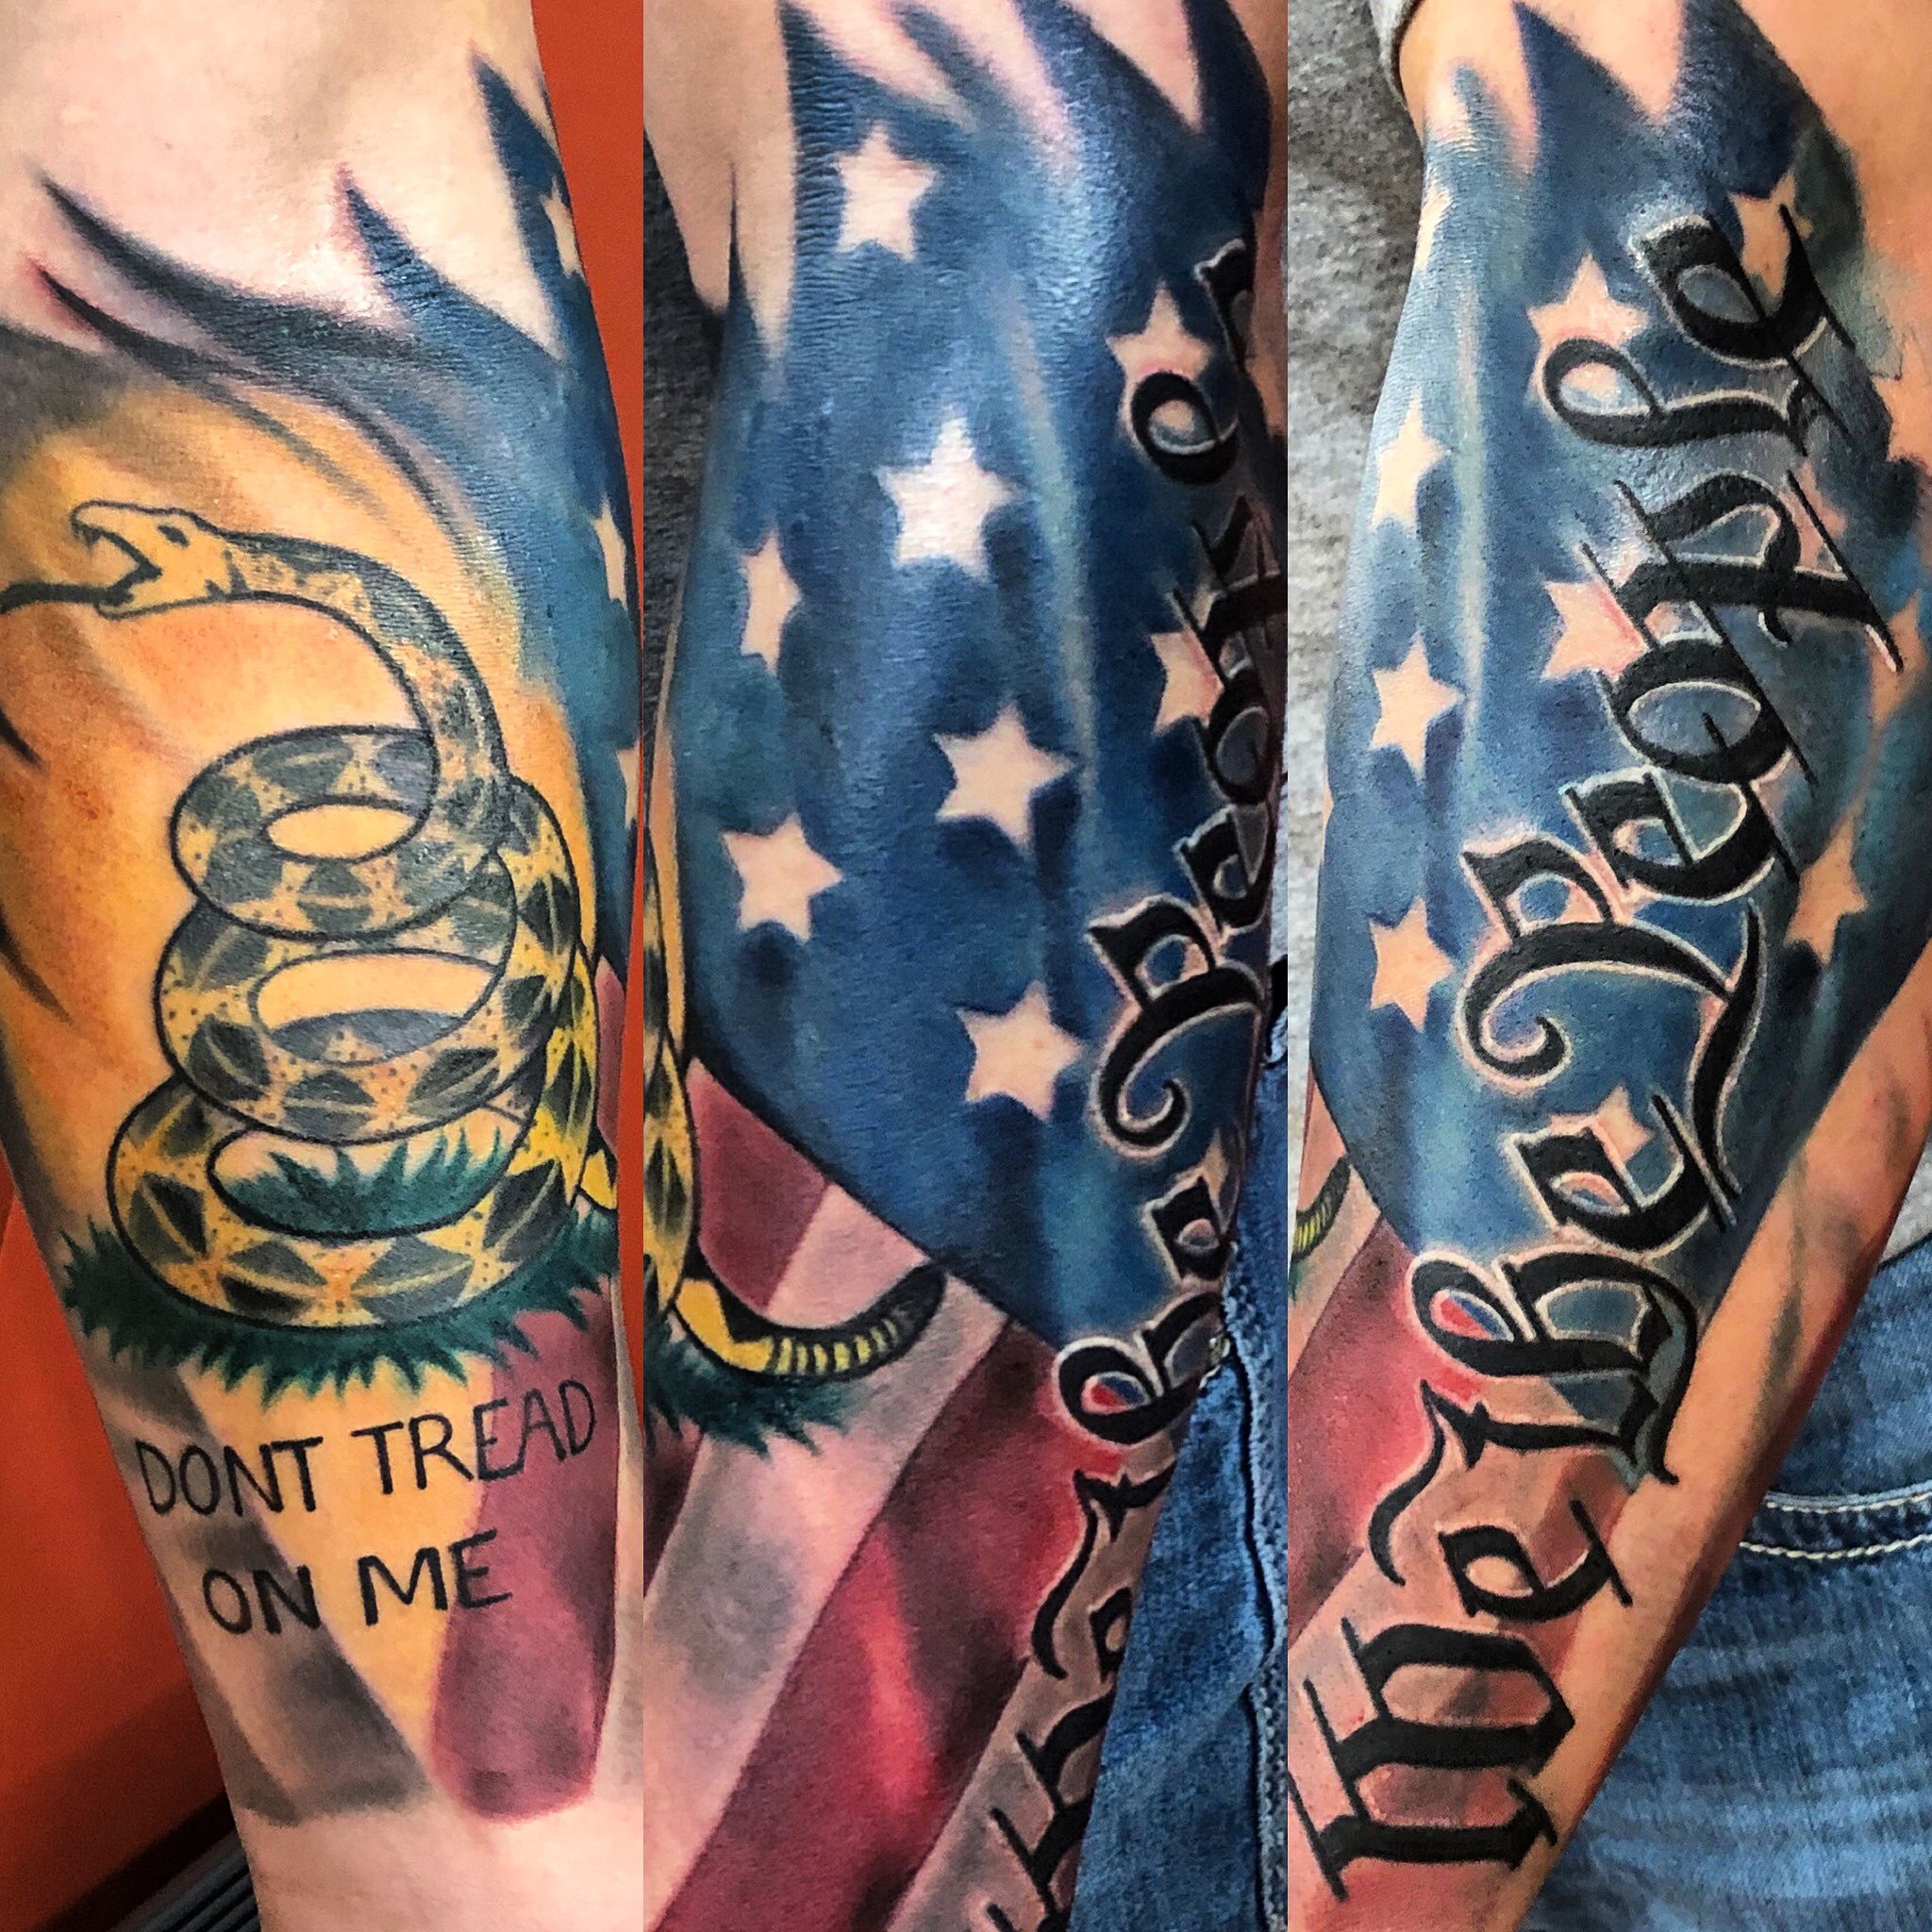 Tattoo uploaded by meagan bohrer  American flag we the people lower sleeve   Tattoodo